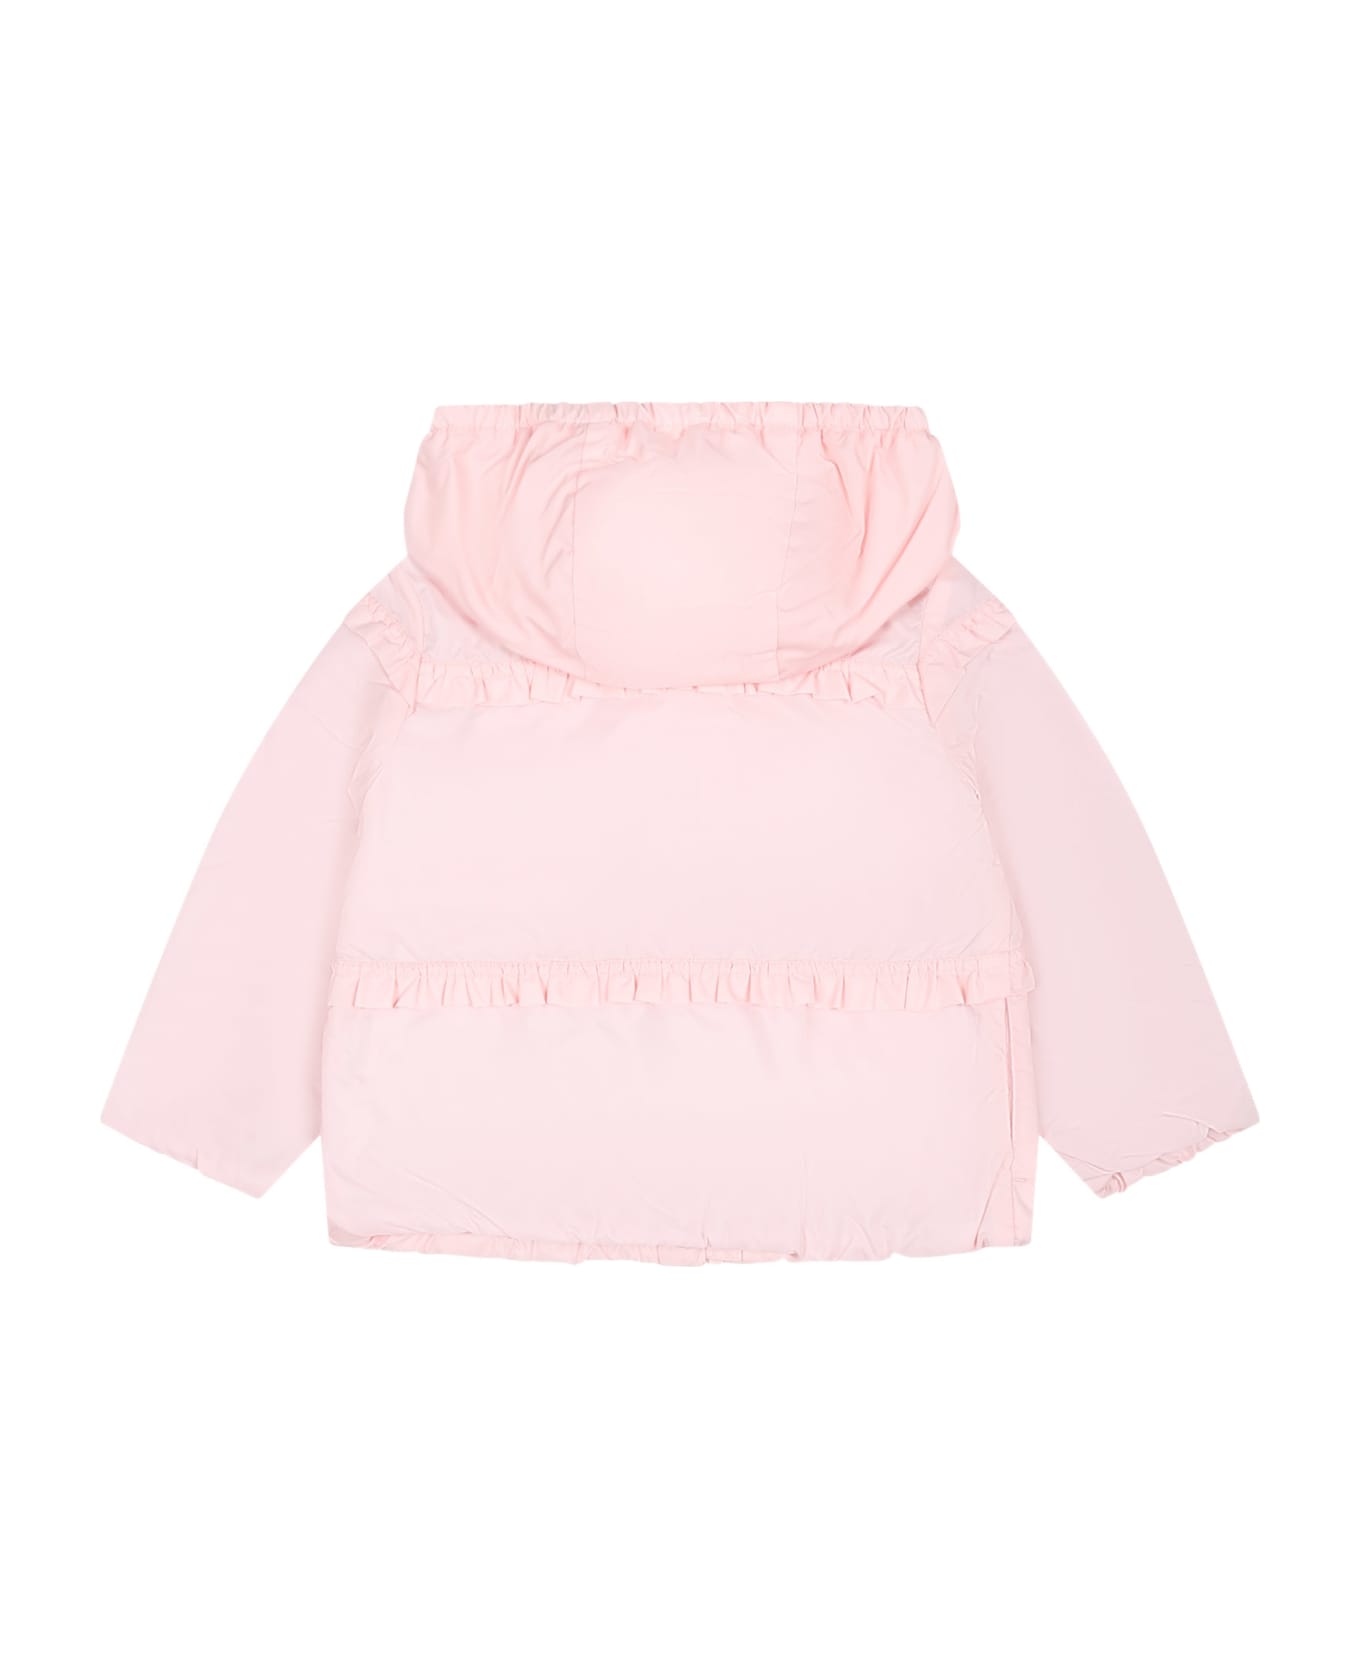 Moncler Pink Hiti Windbreaker For Baby Girl With Logo - Pink